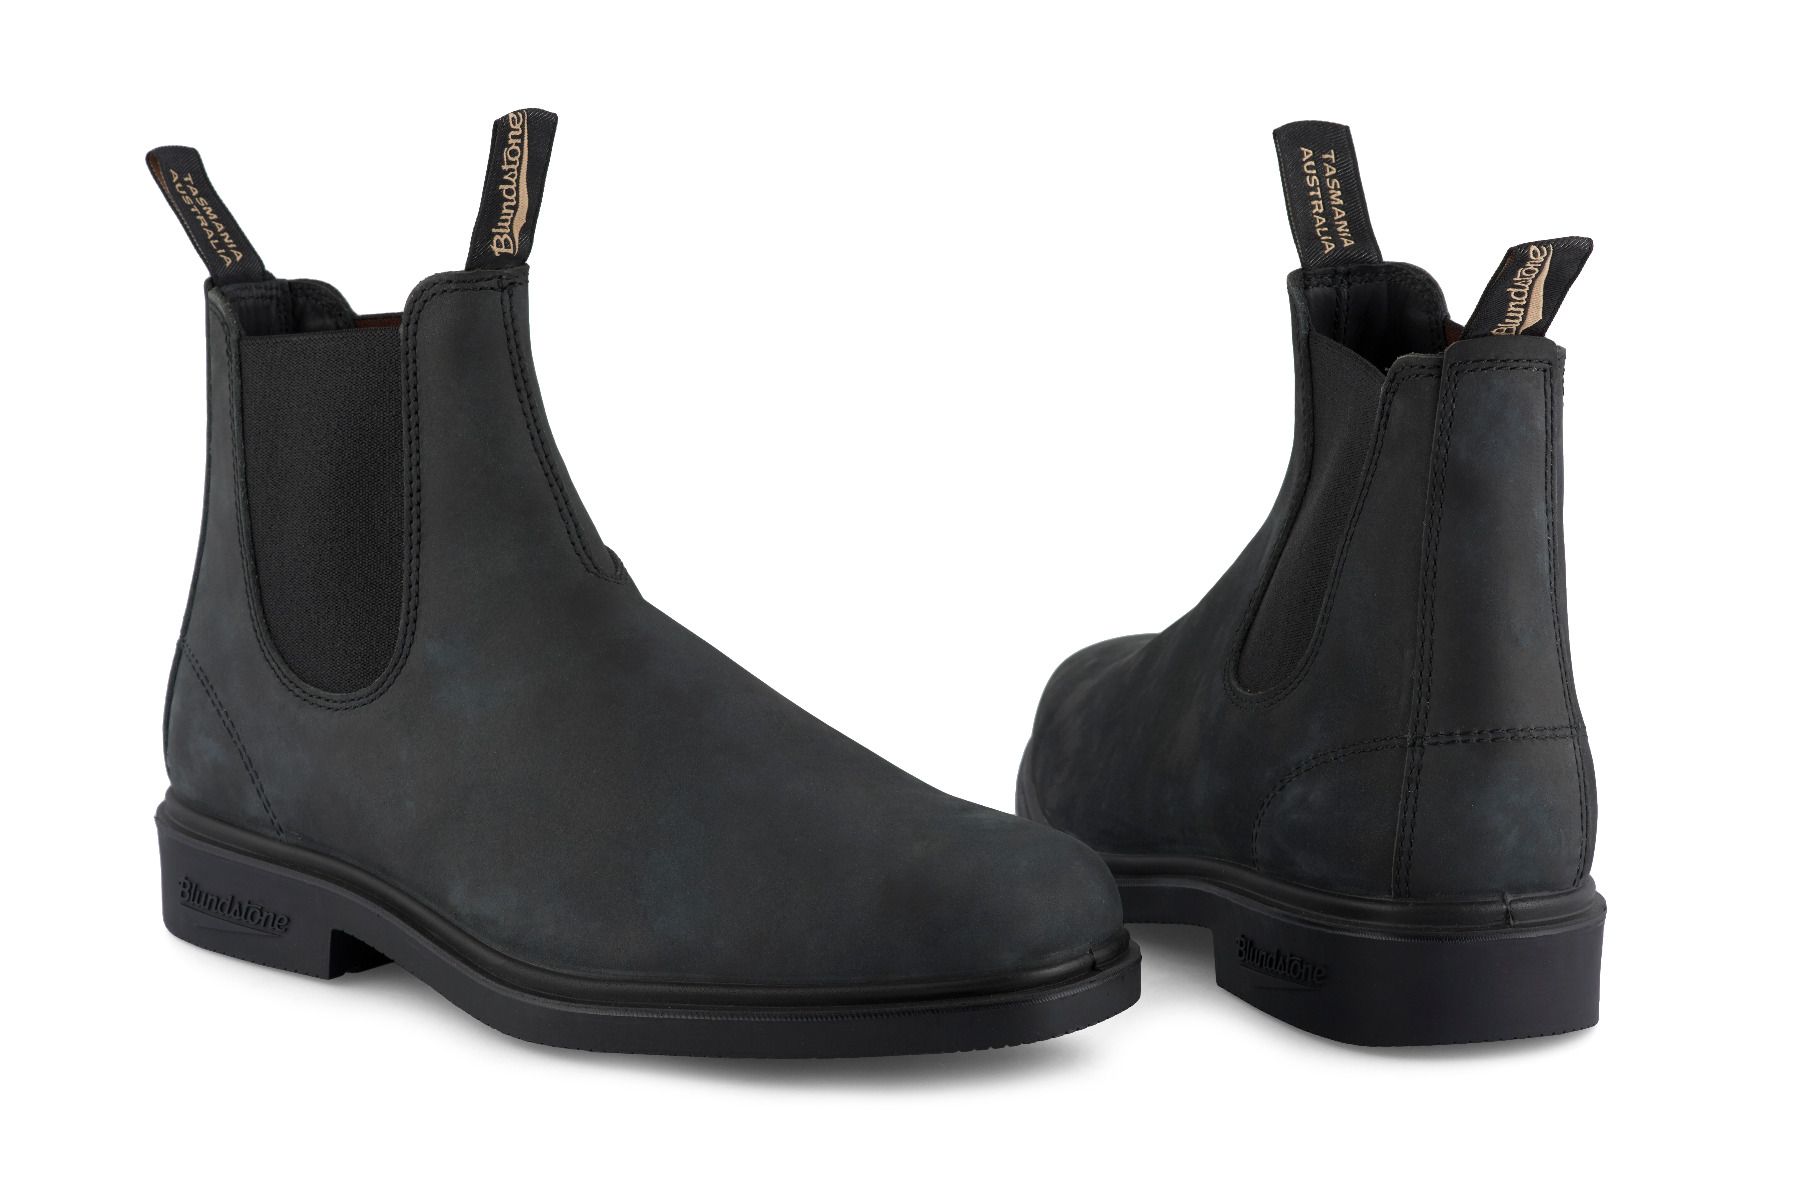 Blundstone 1308 Rustic Black Leather Chiesel Toe Chelsea Boot: Buy ...